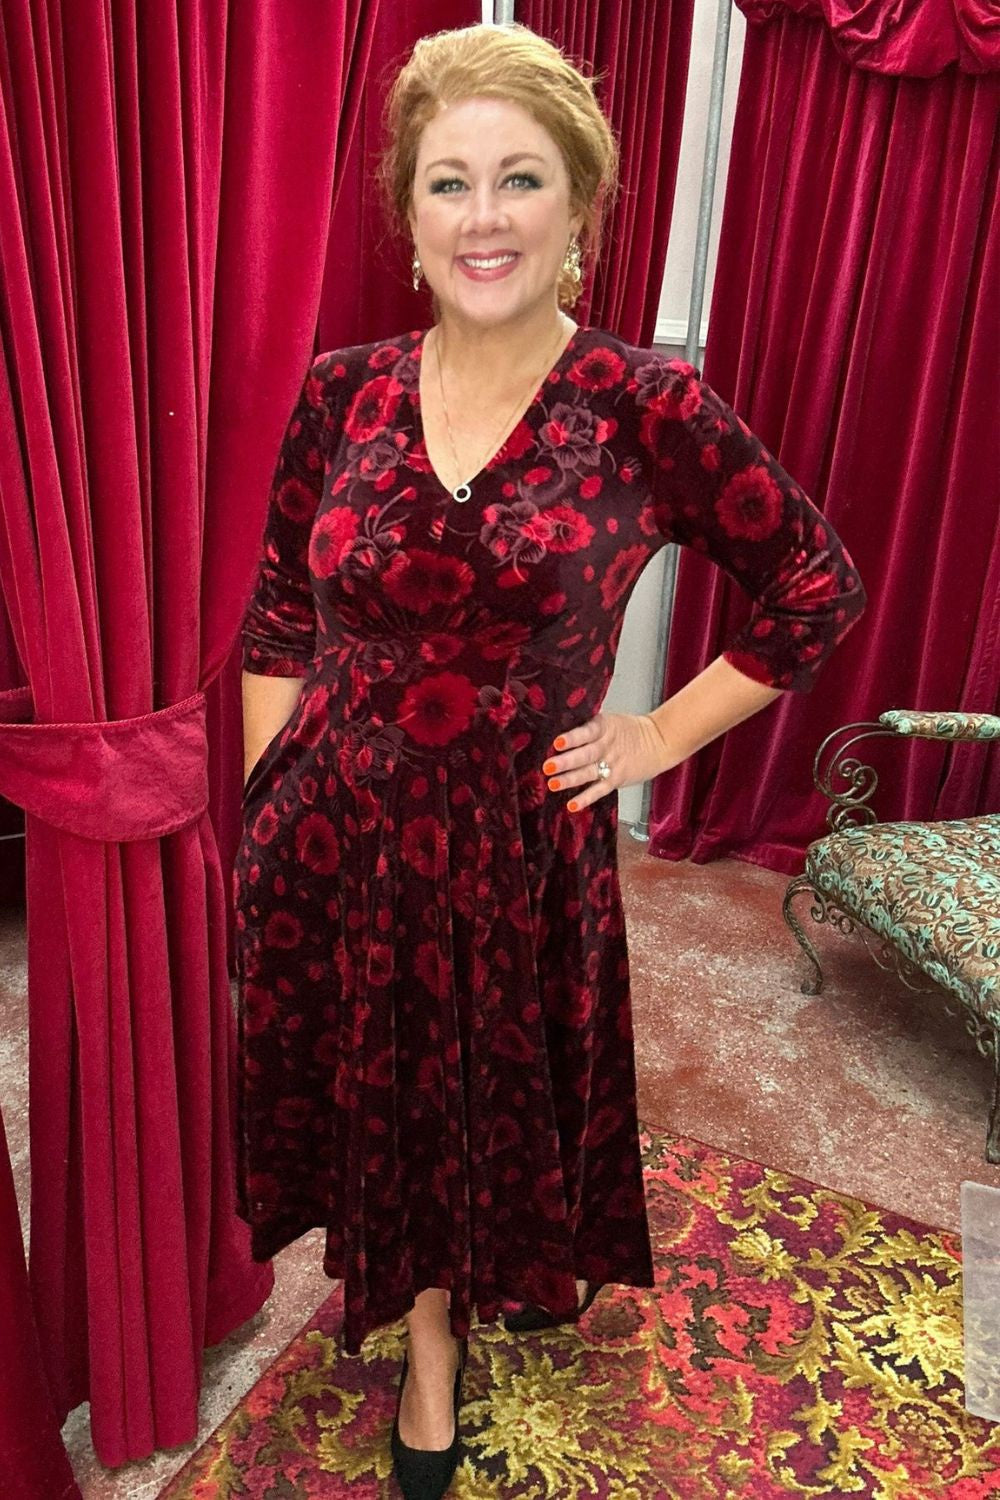 Model wearing the Veronica Jude Dress in red floral spot, by Annah Stretton